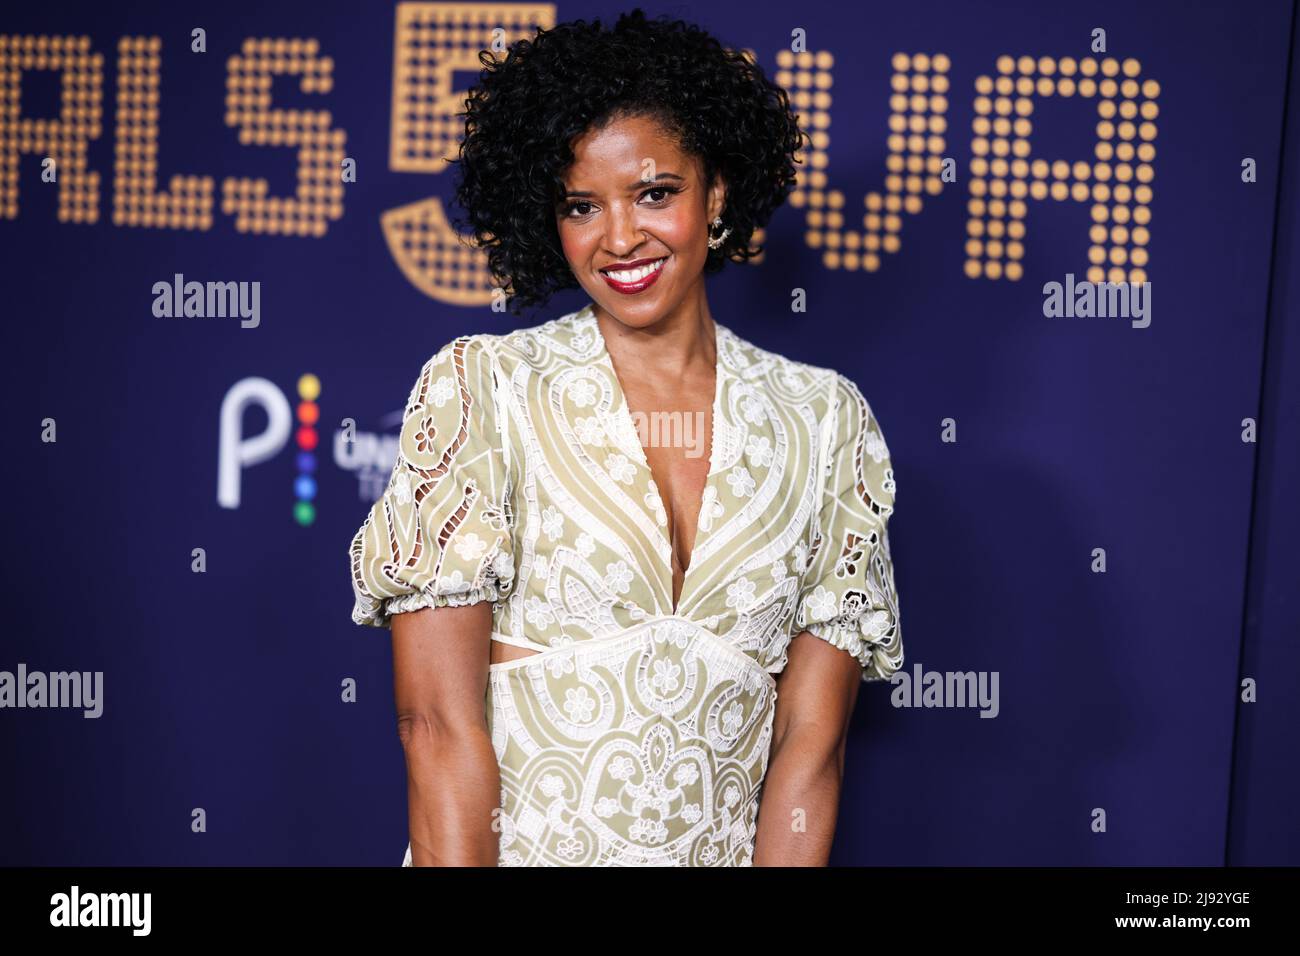 Hollywood, United States. 19th May, 2022. HOLLYWOOD, LOS ANGELES, CALIFORNIA, USA - MAY 19: American actress Renée Elise Goldsberry (Renee Elise Goldsberry) arrives at NBCUniversal's FYC Event For 'Girls5eva' held at the NBCU FYC House on May 19, 2022 in Hollywood, Los Angeles, California, United States. (Photo by Xavier Collin/Image Press Agency) Credit: Image Press Agency/Alamy Live News Stock Photo